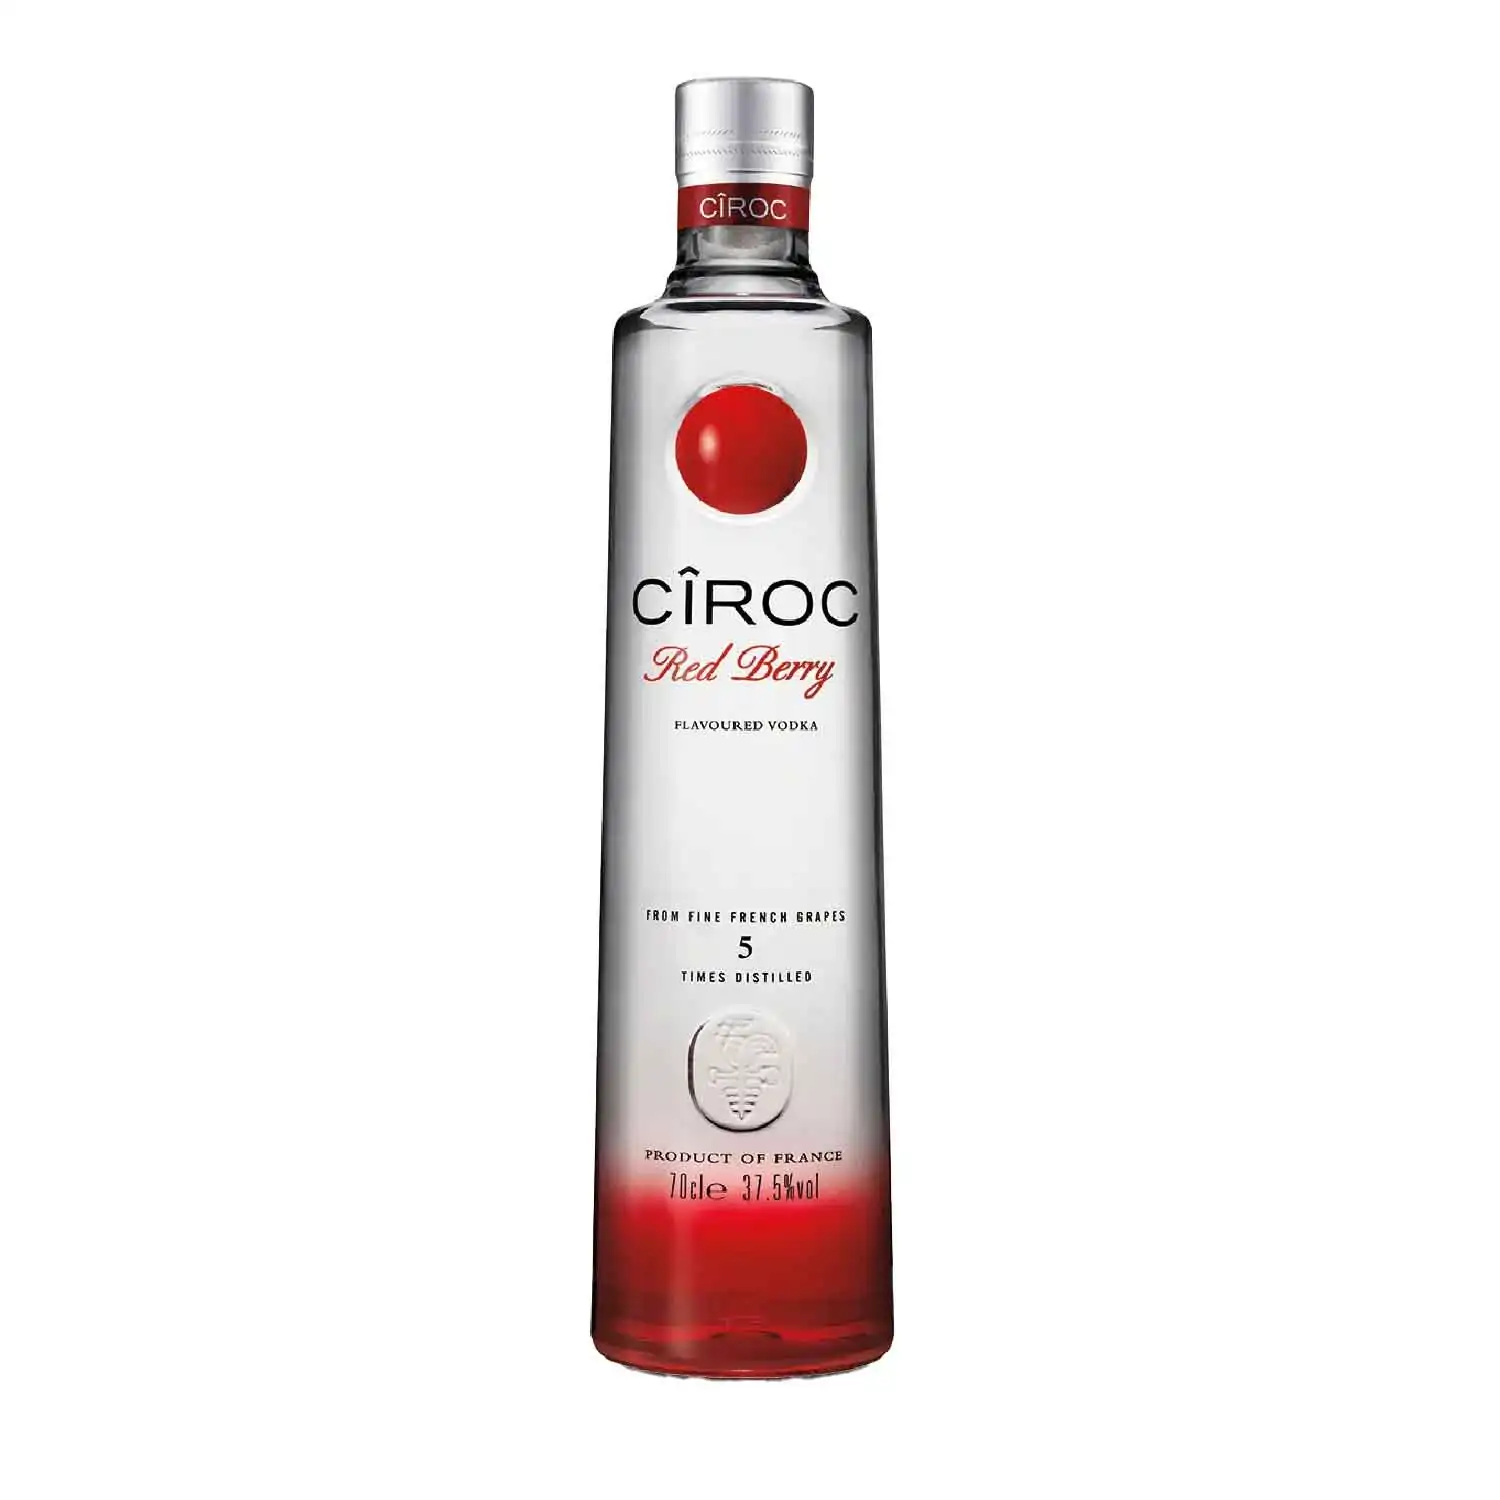 Cîroc baie rouge 70cl Alc 37,5% - Buy at Real Tobacco